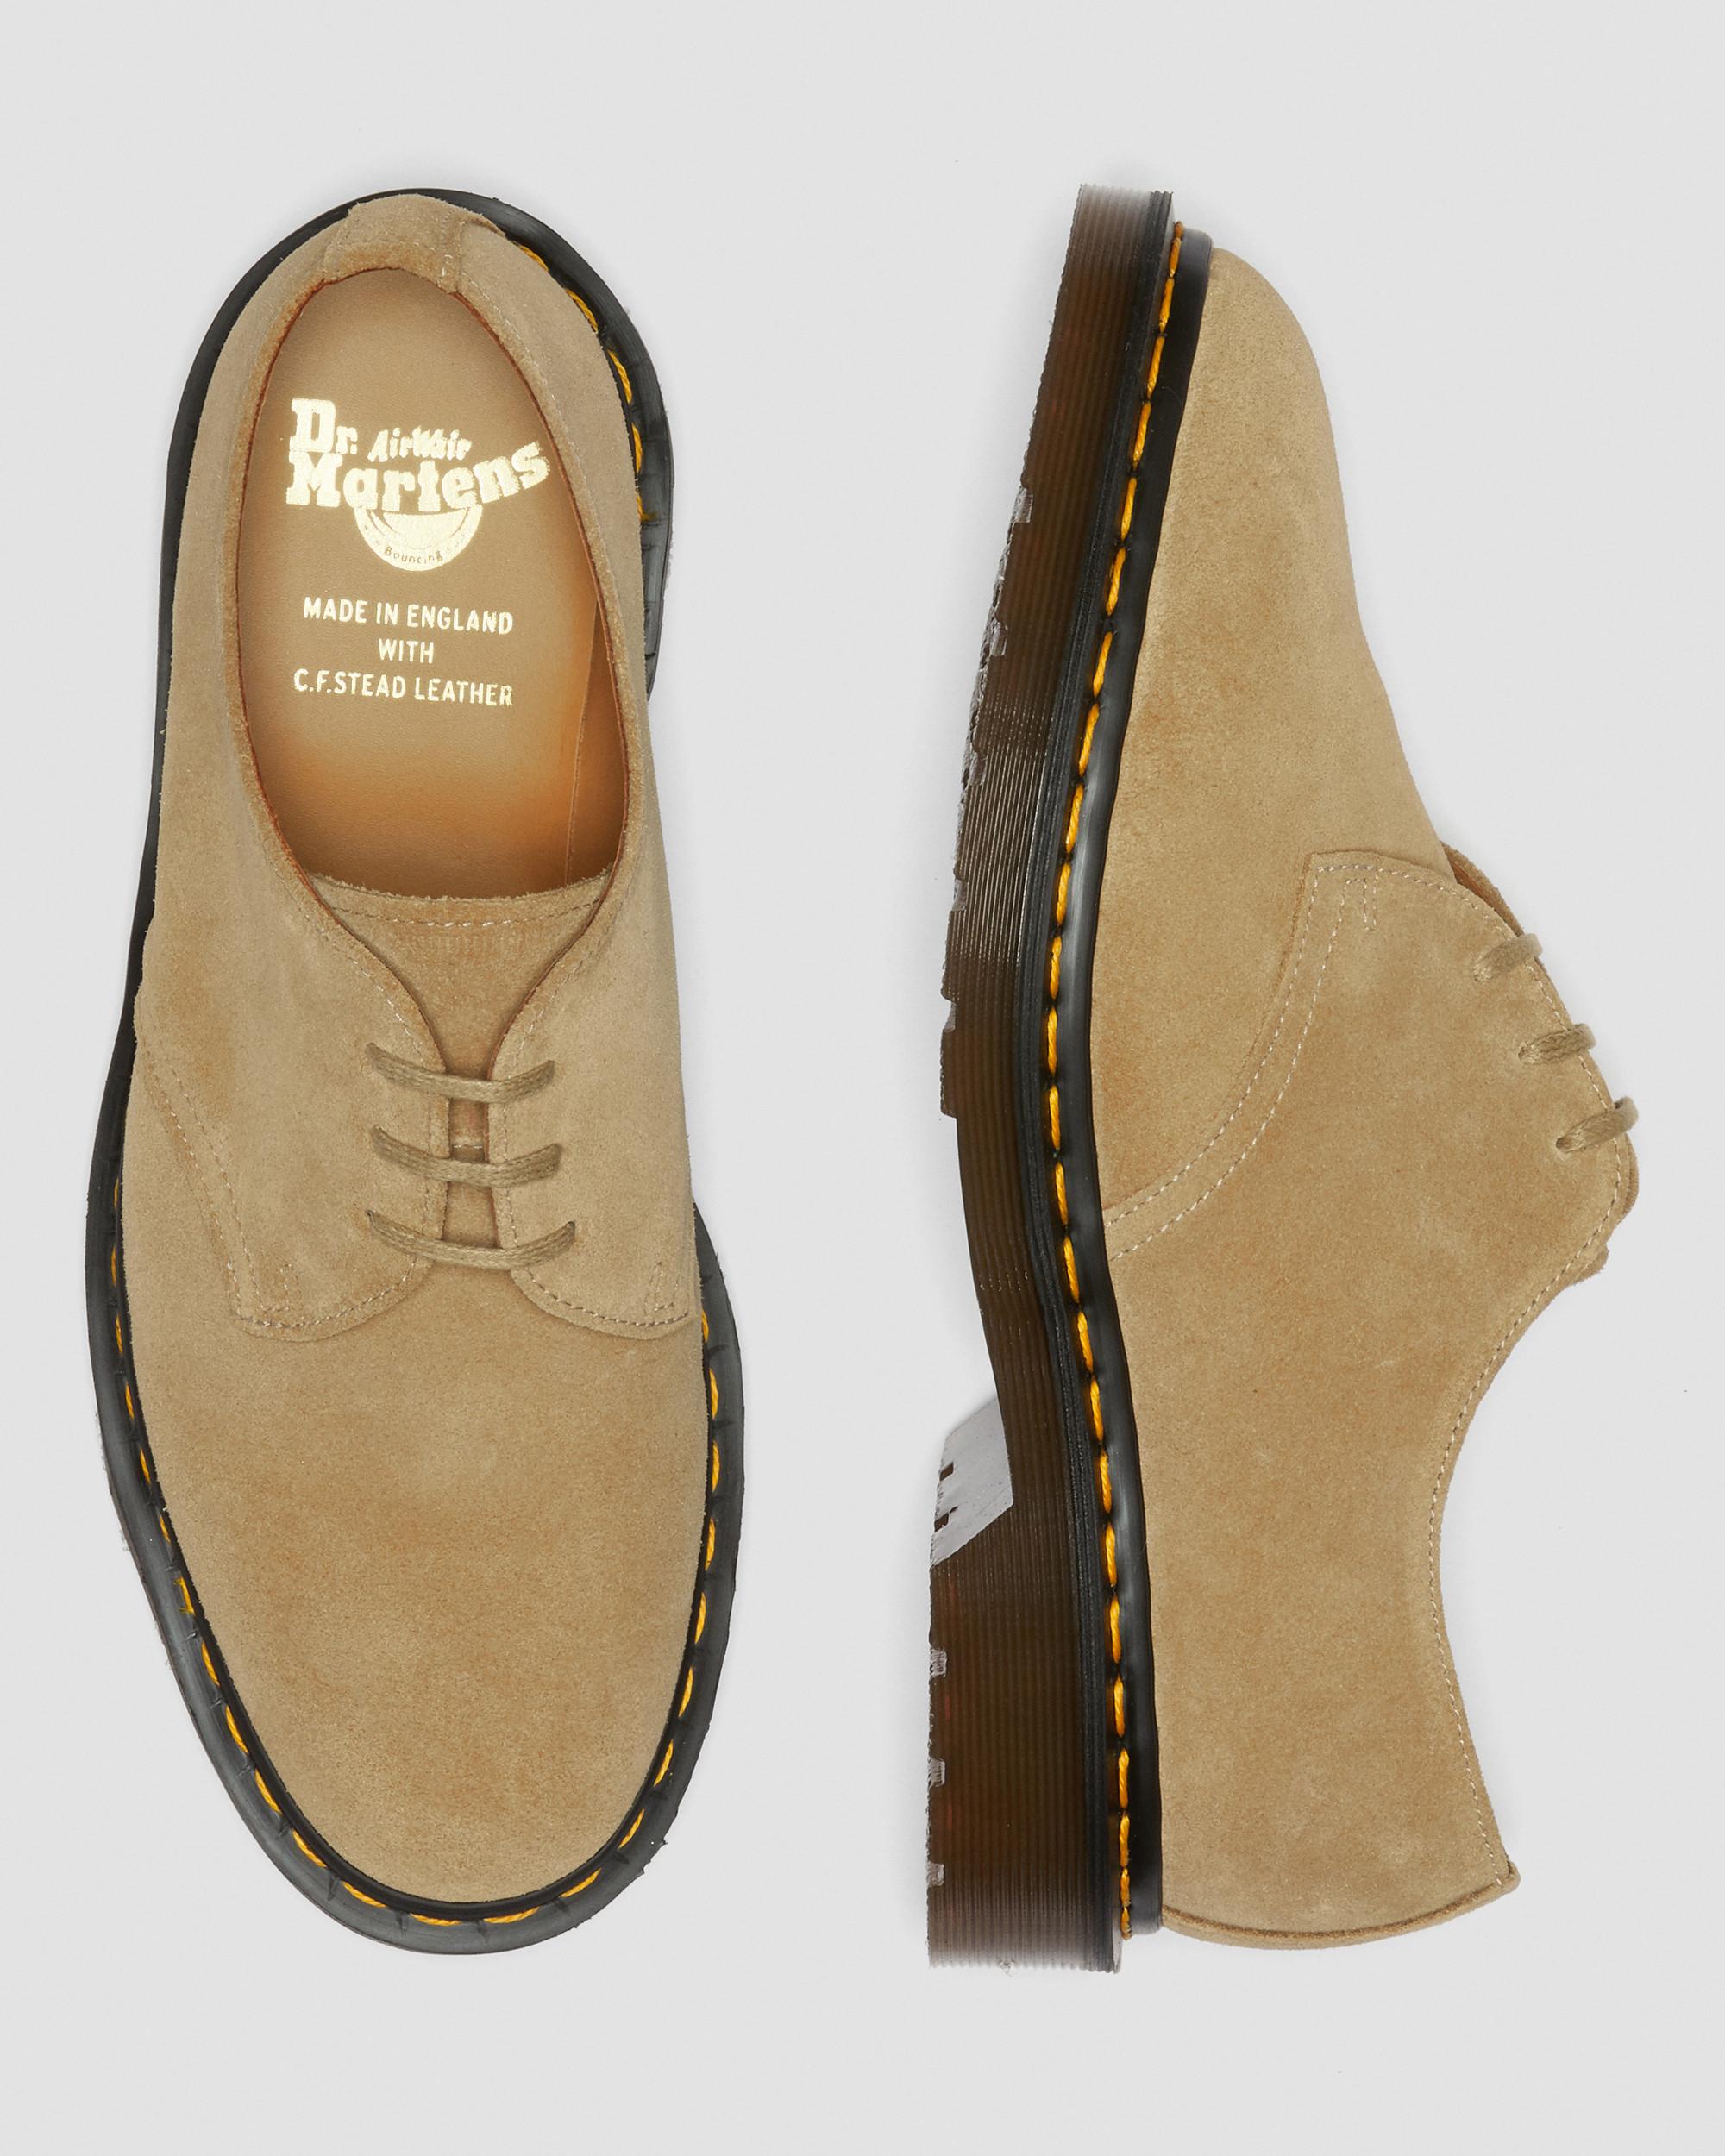 1461 Made in England Buck Suede Oxford Shoes1461 Made in England Buck -mokkakengät Dr. Martens